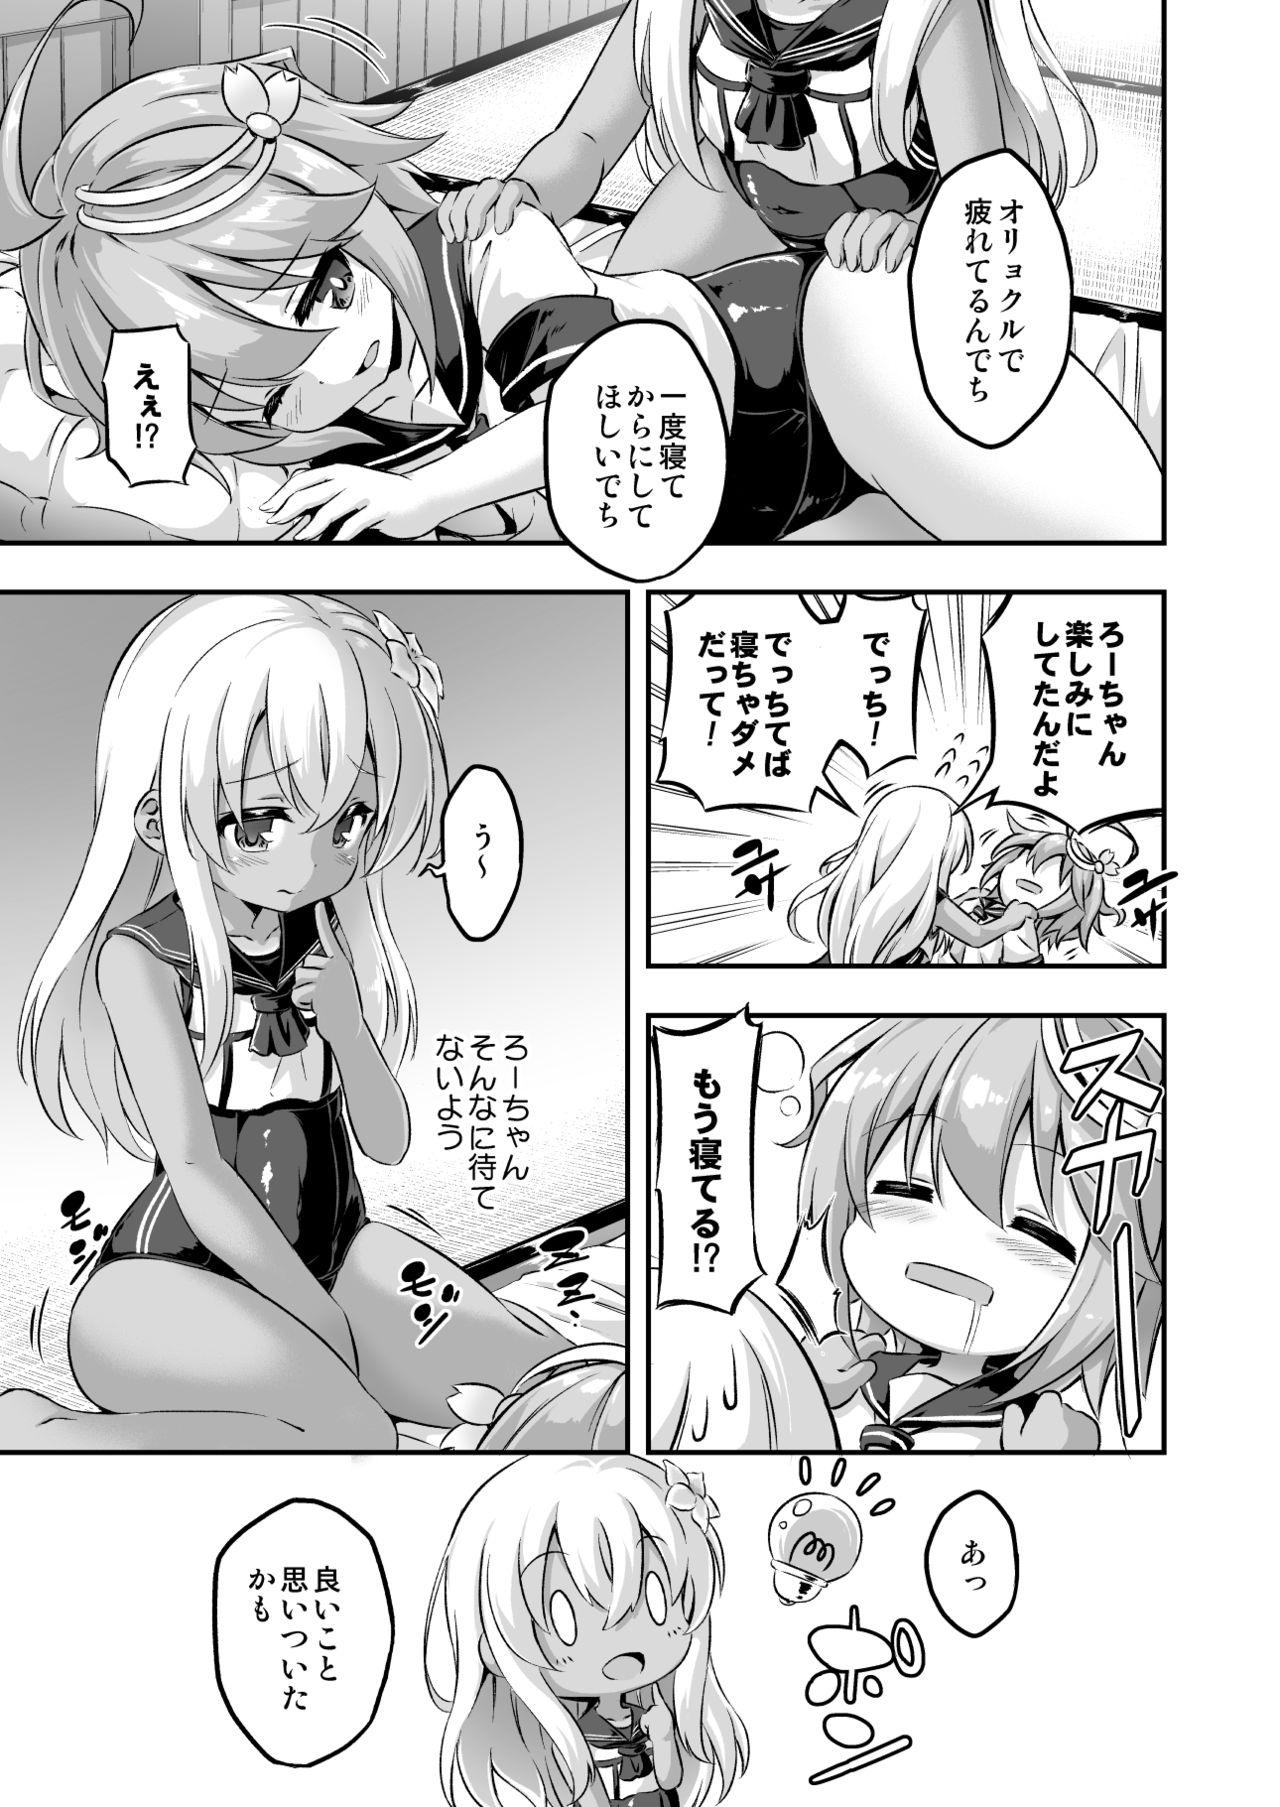 Chacal Loli & Futa Vol. 8 - Kantai collection Free Real Porn - Page 4